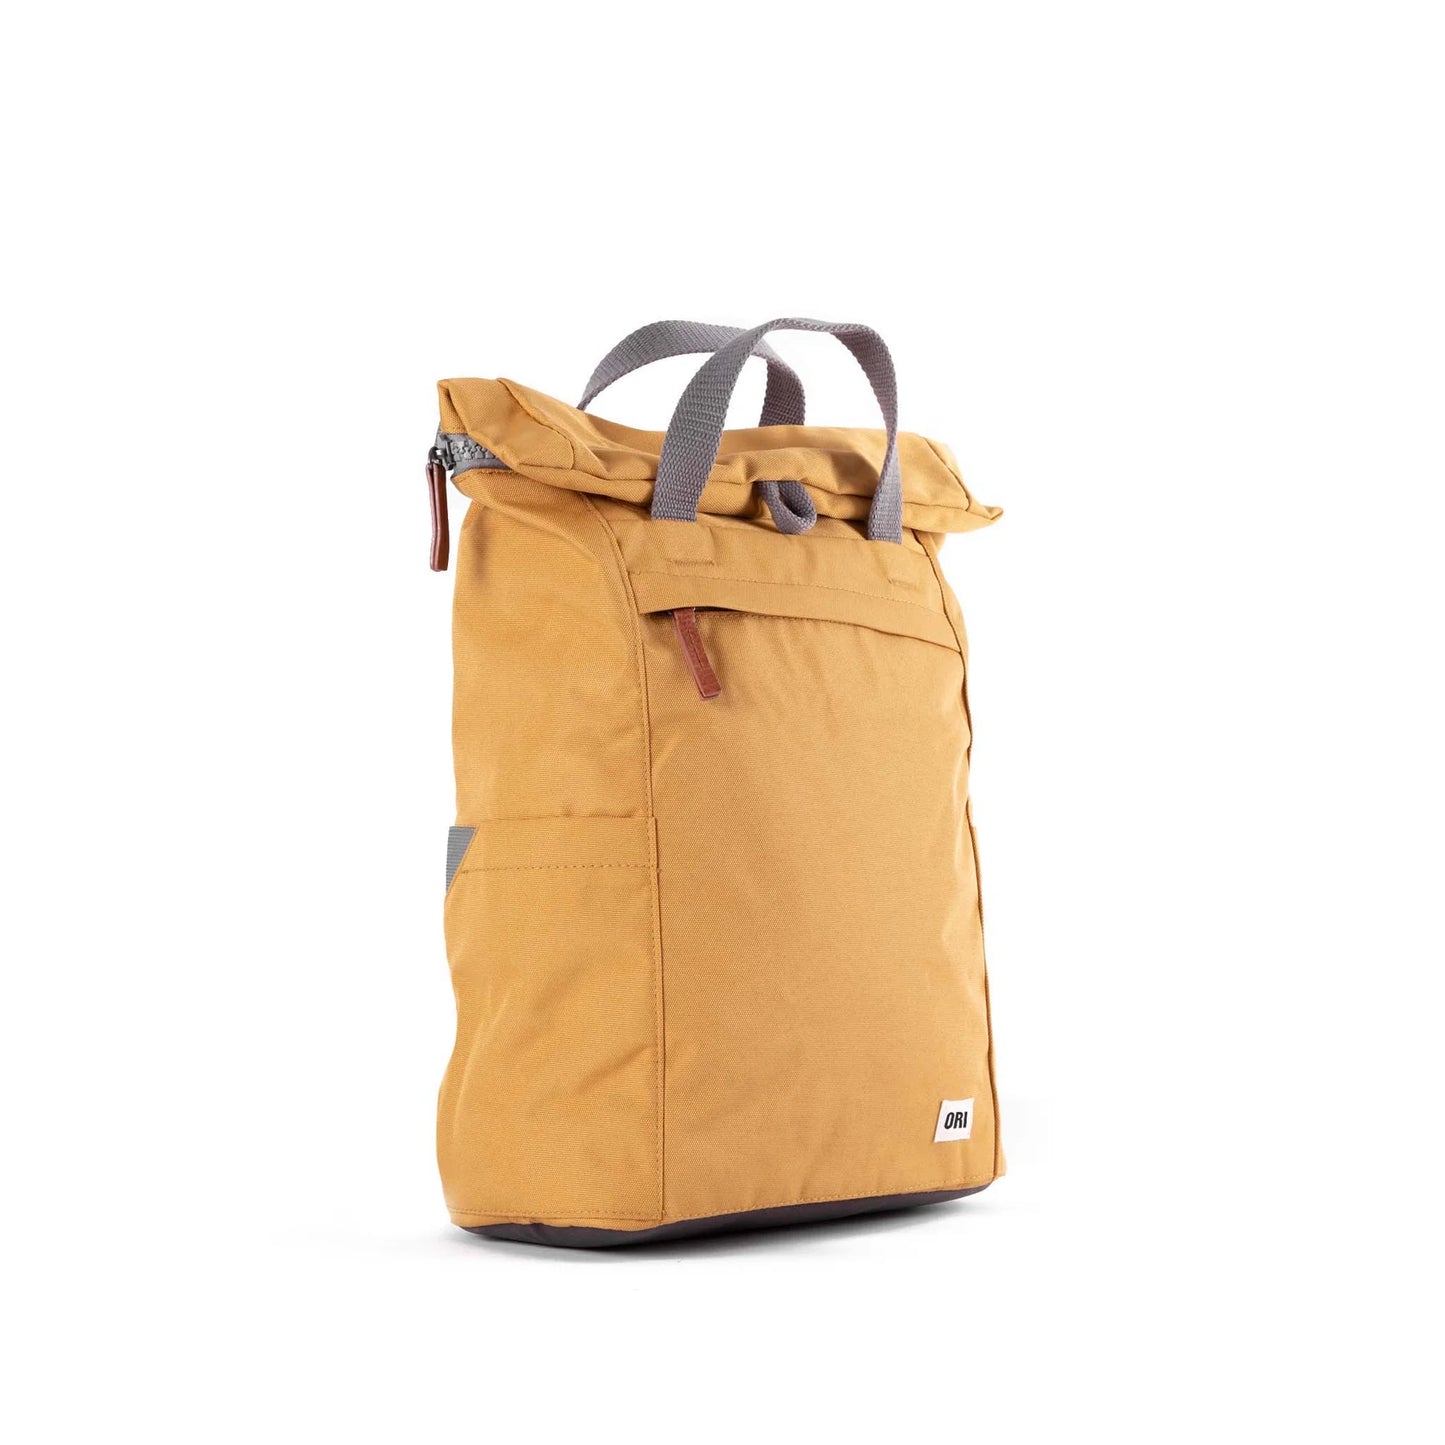 Finchley A Sustainable Flax (Canvas) - Medium